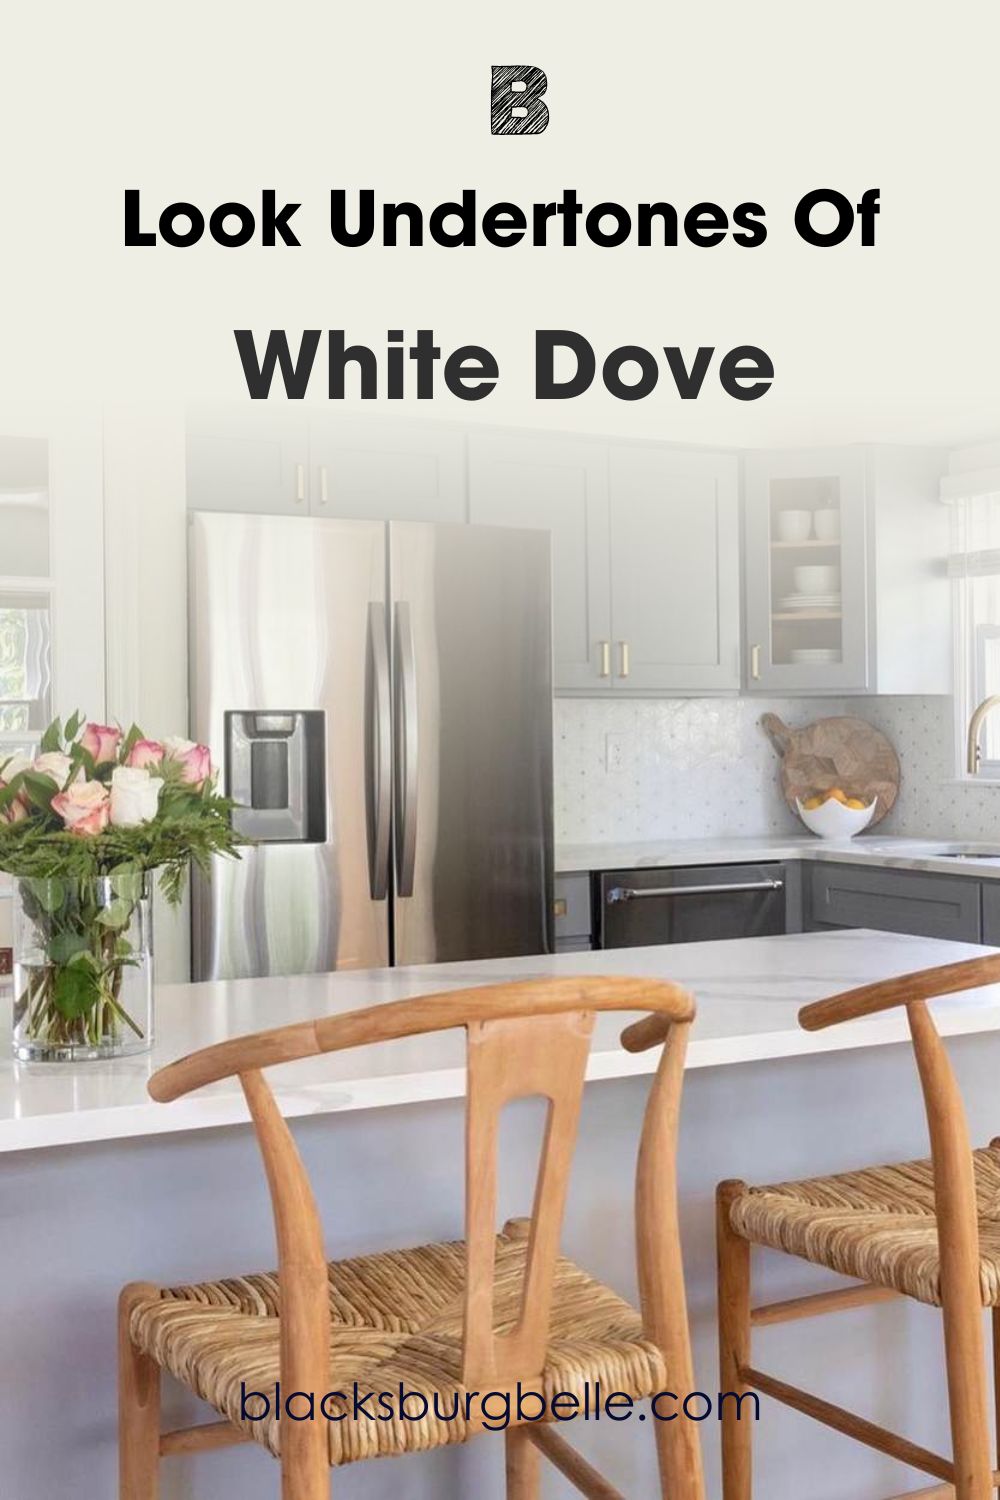 A Closer Look at the Undertones of White Dove